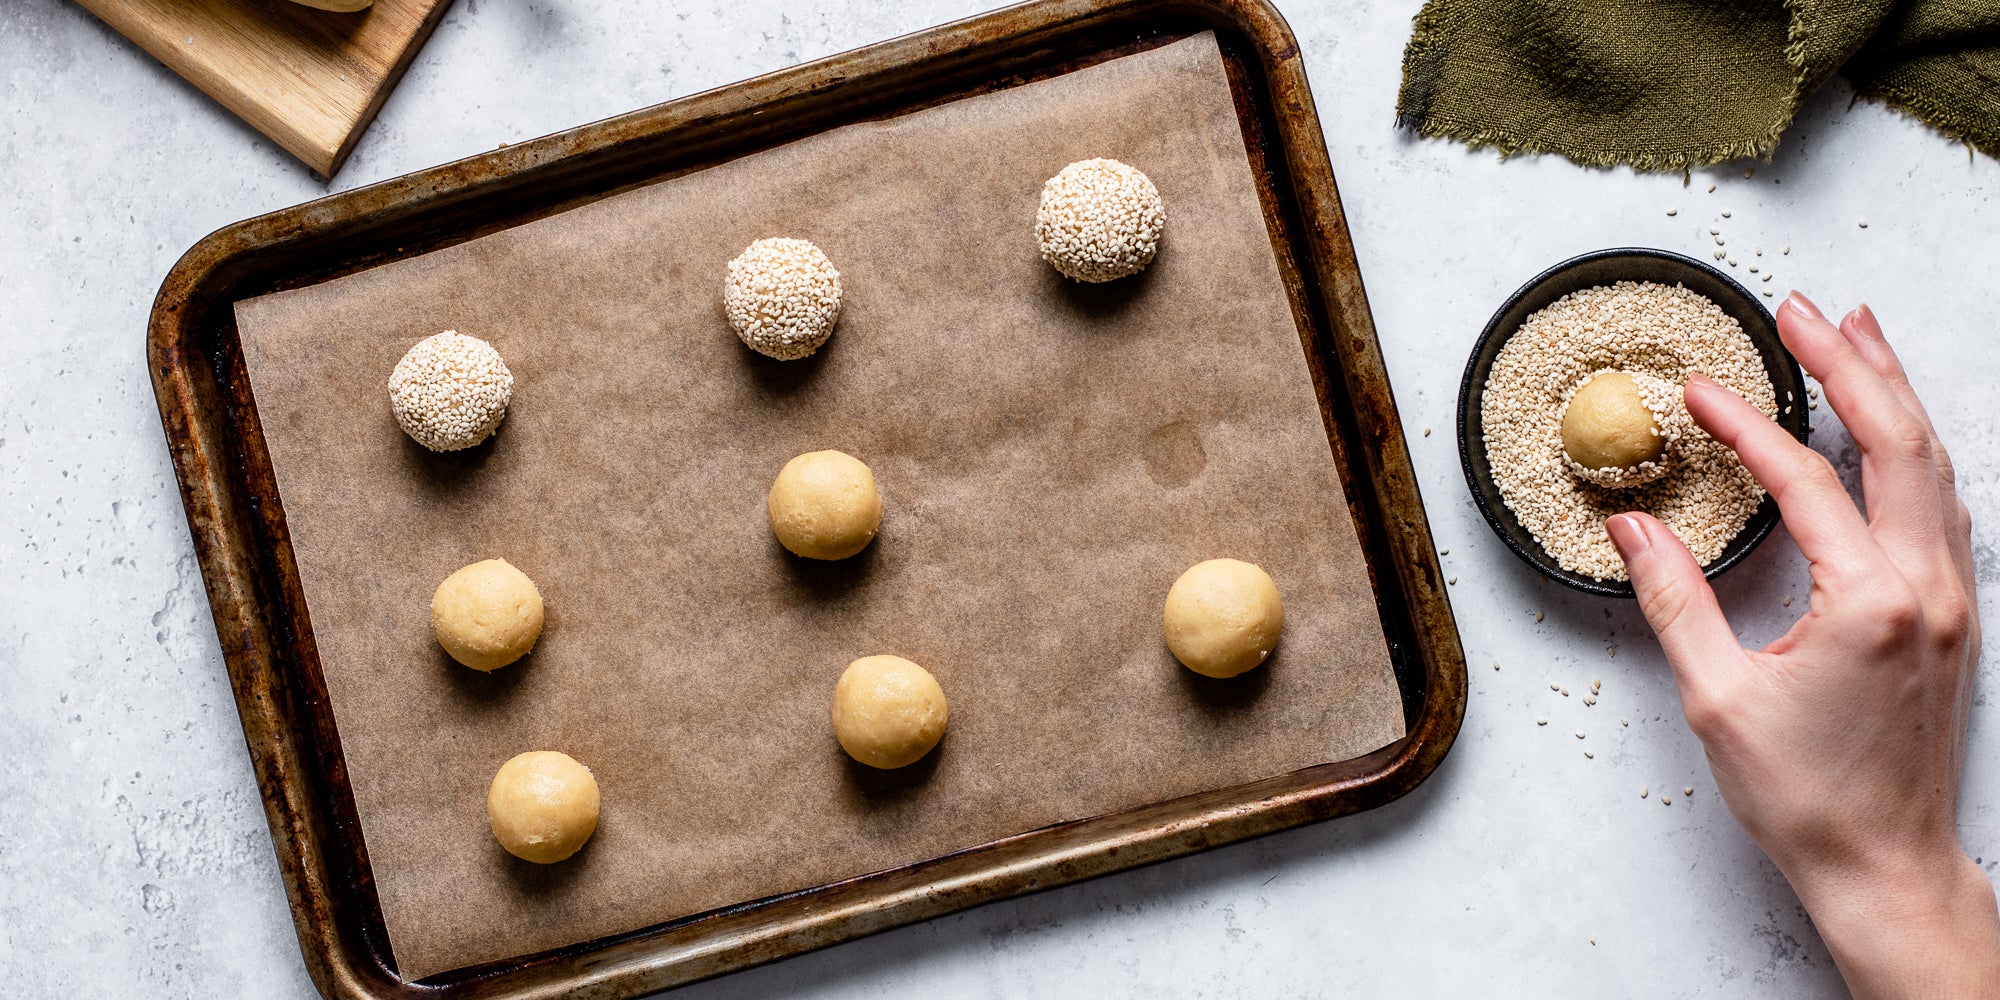 Top down view of raw sesame cookie dough on a baking tray